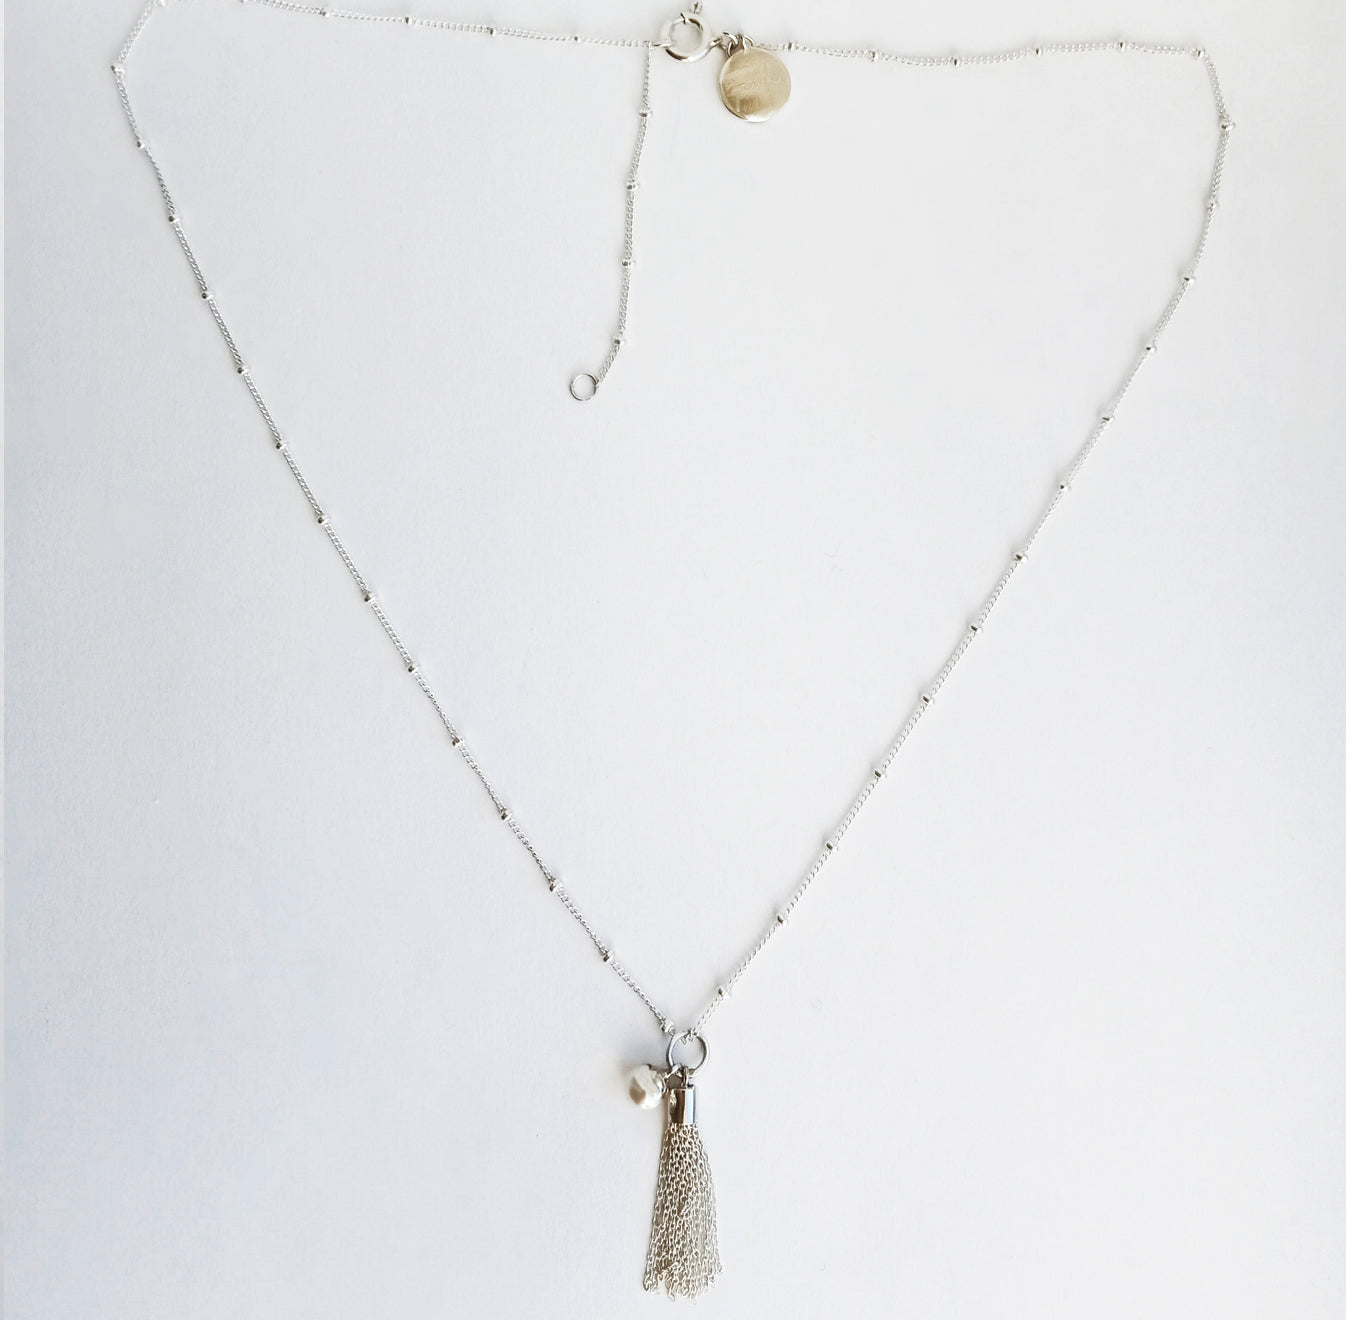 Silver Tassel Necklace with Small Pearl